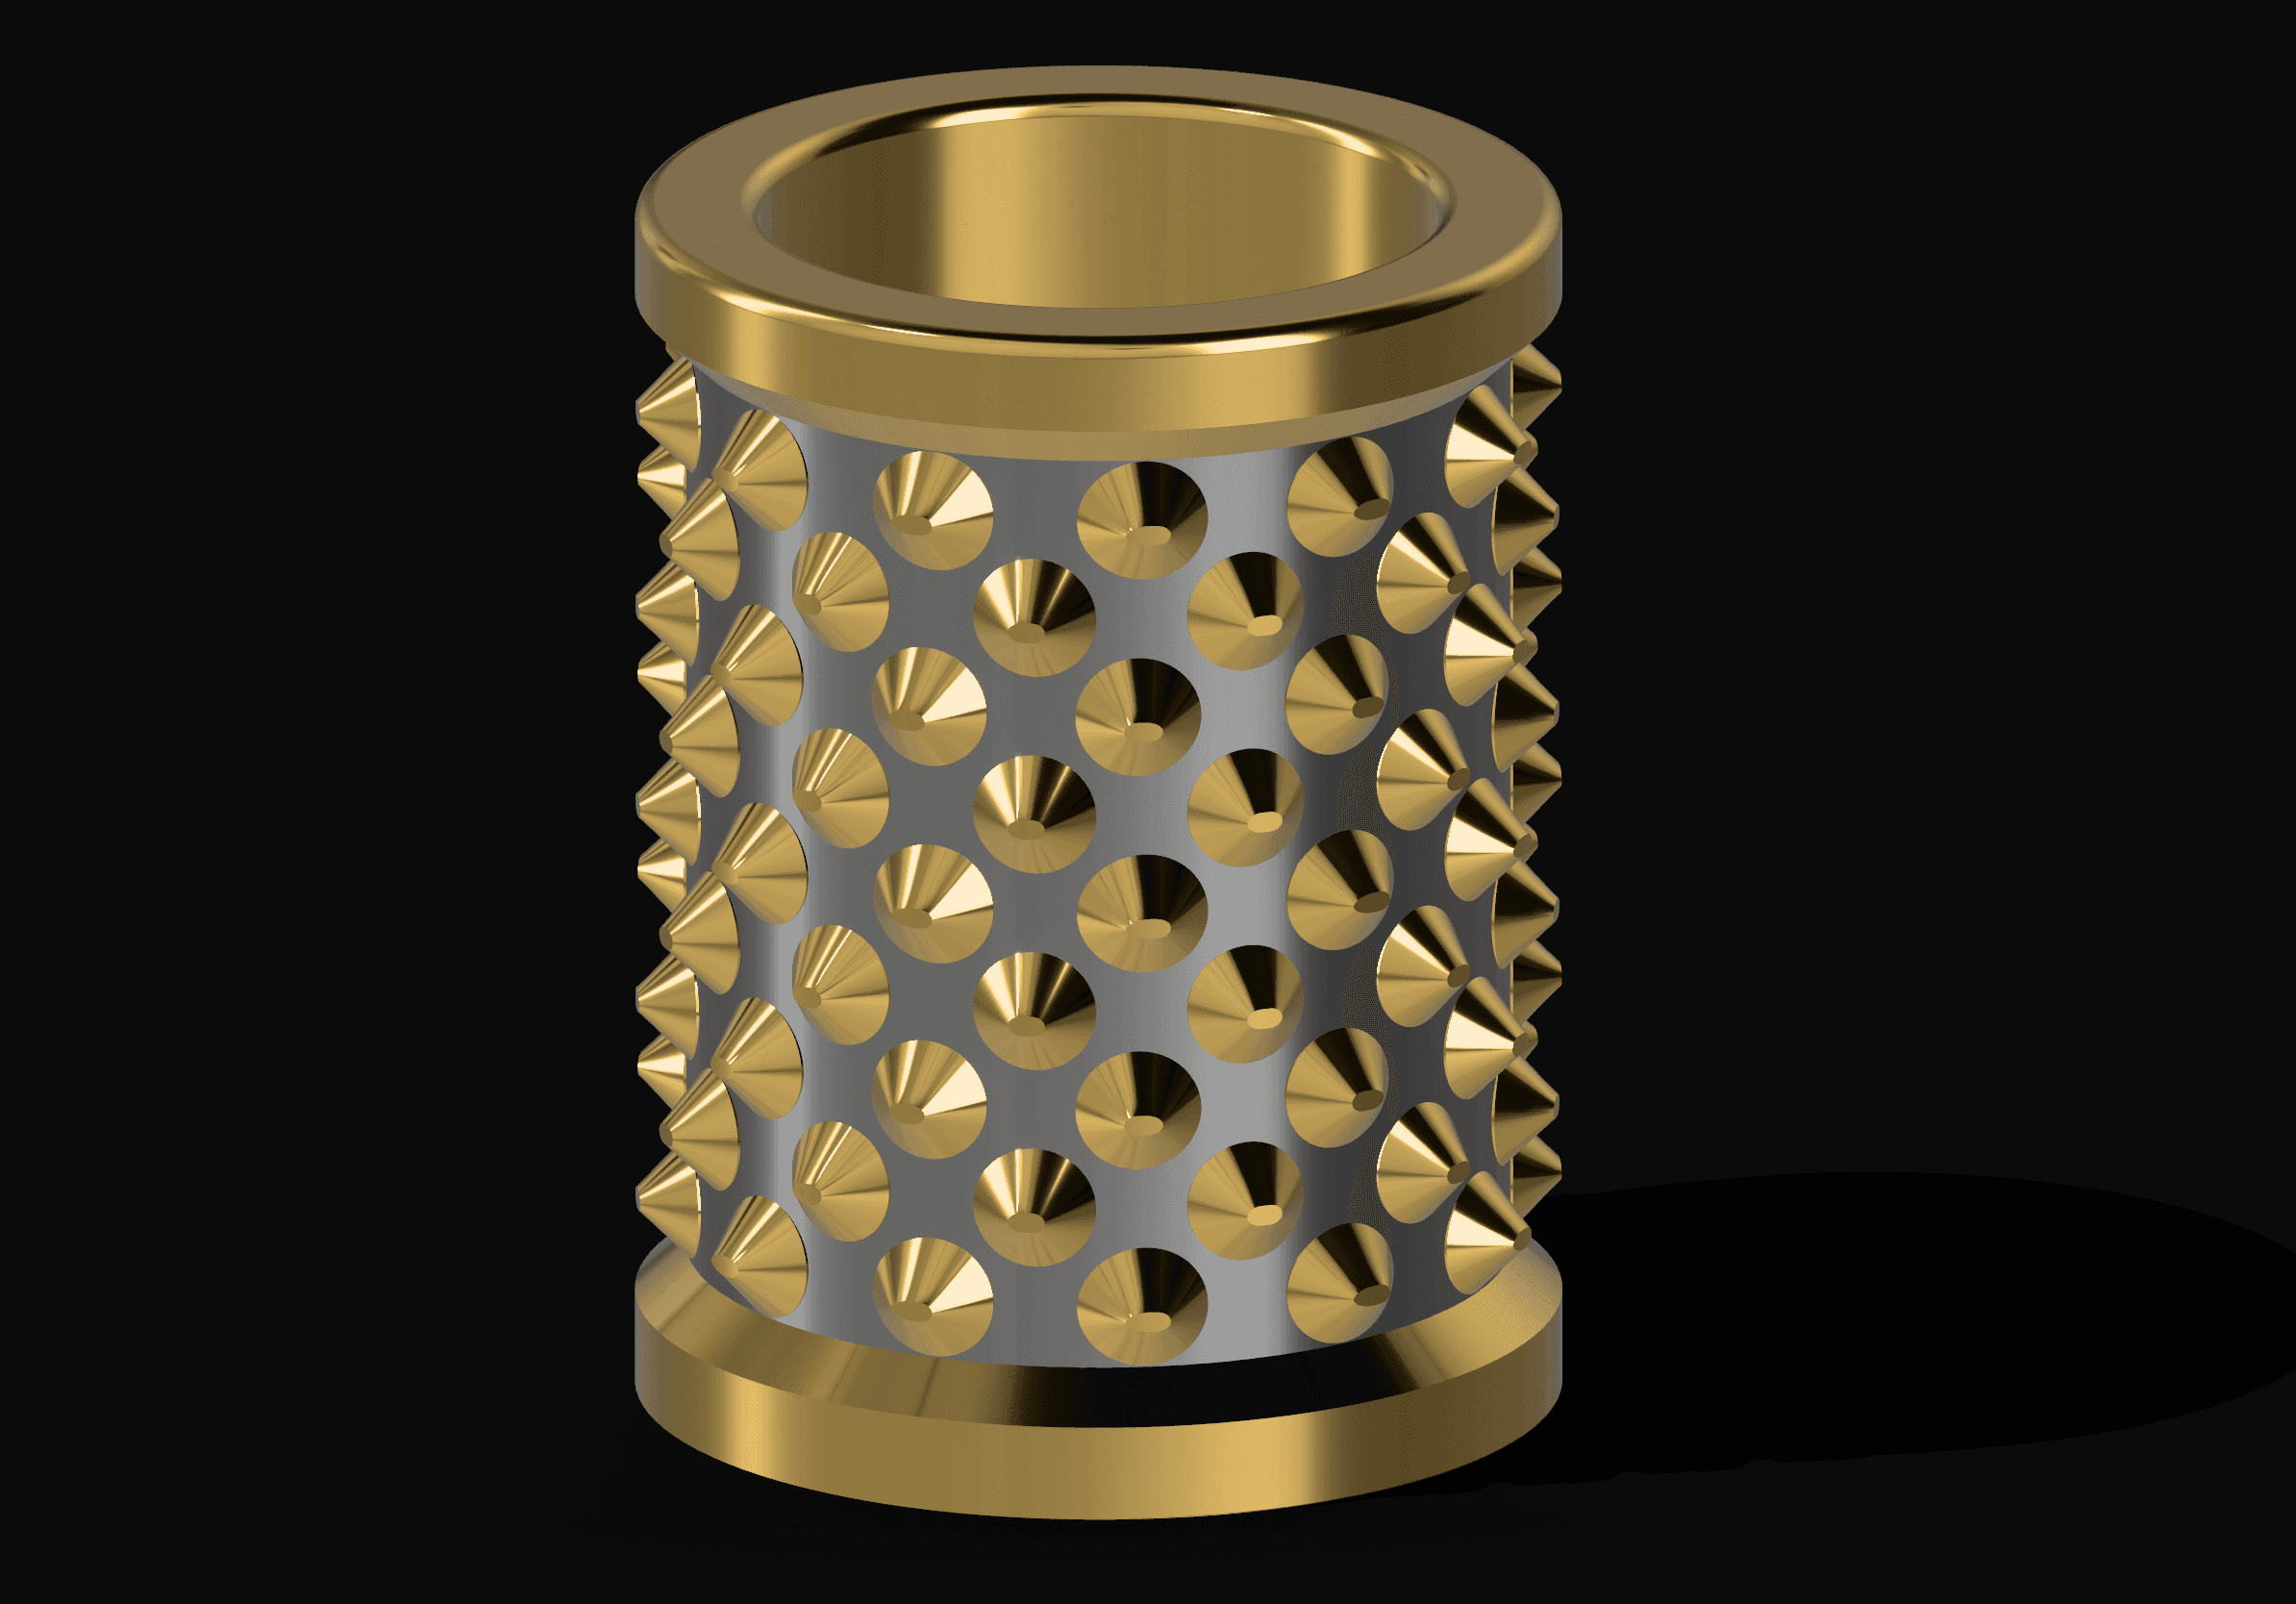 Studded Coozie support free 3d model